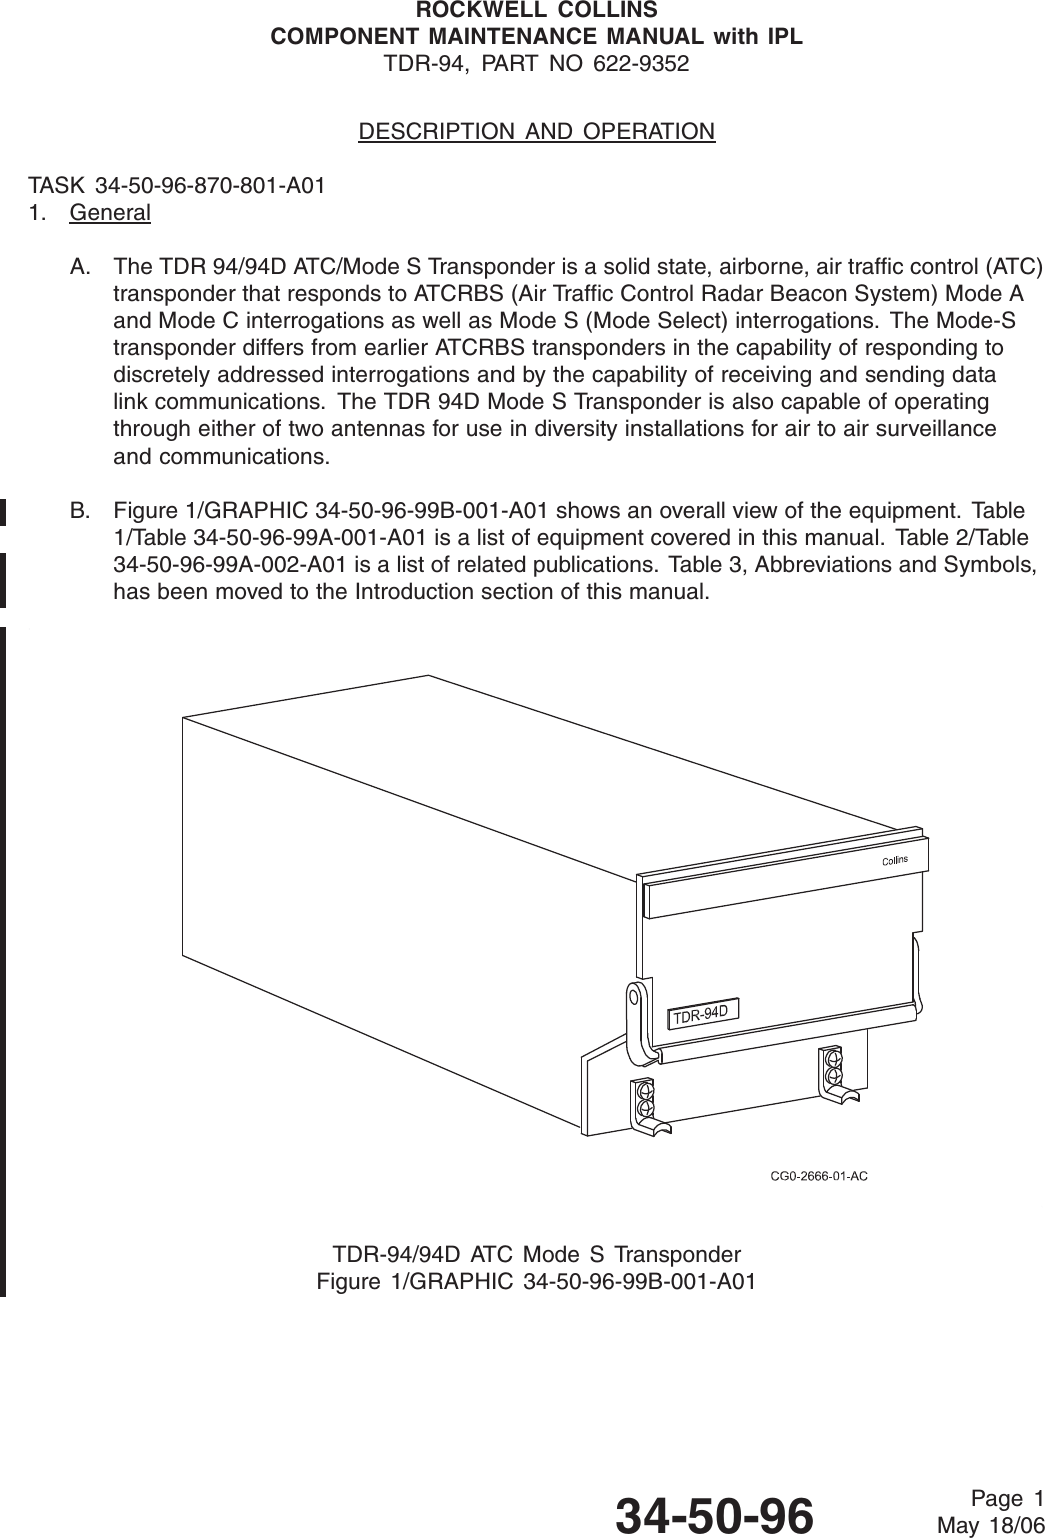 ROCKWELL COLLINSCOMPONENT MAINTENANCE MANUAL with IPLTDR-94, PART NO 622-9352DESCRIPTION AND OPERATIONTASK 34-50-96-870-801-A011. GeneralA. The TDR 94/94D ATC/Mode S Transponder is a solid state, airborne, air traffic control (ATC)transponder that responds to ATCRBS (Air Traffic Control Radar Beacon System) Mode Aand Mode C interrogations as well as Mode S (Mode Select) interrogations. The Mode-Stransponder differs from earlier ATCRBS transponders in the capability of responding todiscretely addressed interrogations and by the capability of receiving and sending datalink communications. The TDR 94D Mode S Transponder is also capable of operatingthrough either of two antennas for use in diversity installations for air to air surveillanceand communications.B. Figure 1/GRAPHIC 34-50-96-99B-001-A01 shows an overall view of the equipment. Table1/Table 34-50-96-99A-001-A01 is a list of equipment covered in this manual. Table 2/Table34-50-96-99A-002-A01 is a list of related publications. Table 3, Abbreviations and Symbols,has been moved to the Introduction section of this manual.TDR-94/94D ATC Mode S TransponderFigure 1/GRAPHIC 34-50-96-99B-001-A0134-50-96 Page 1May 18/06